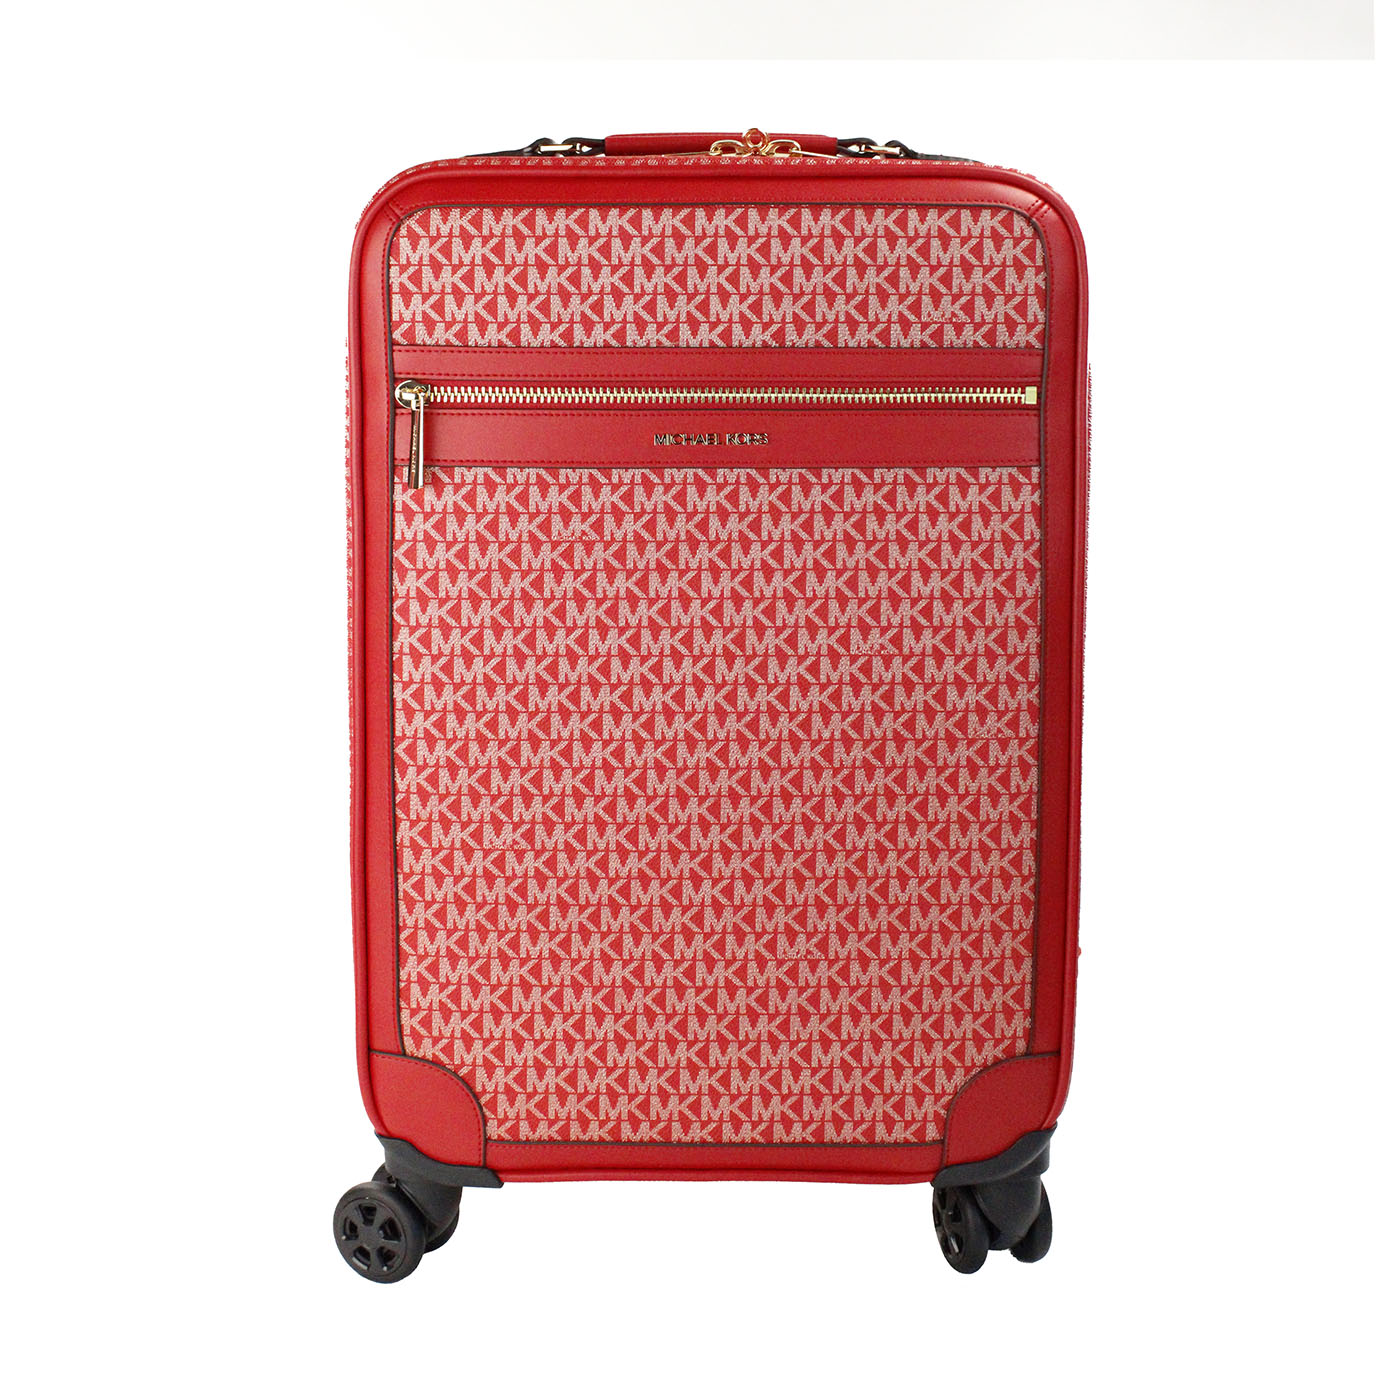 Michael Kors Travel Small Red Signature Trolley Rolling Suitcase Carry On Bag